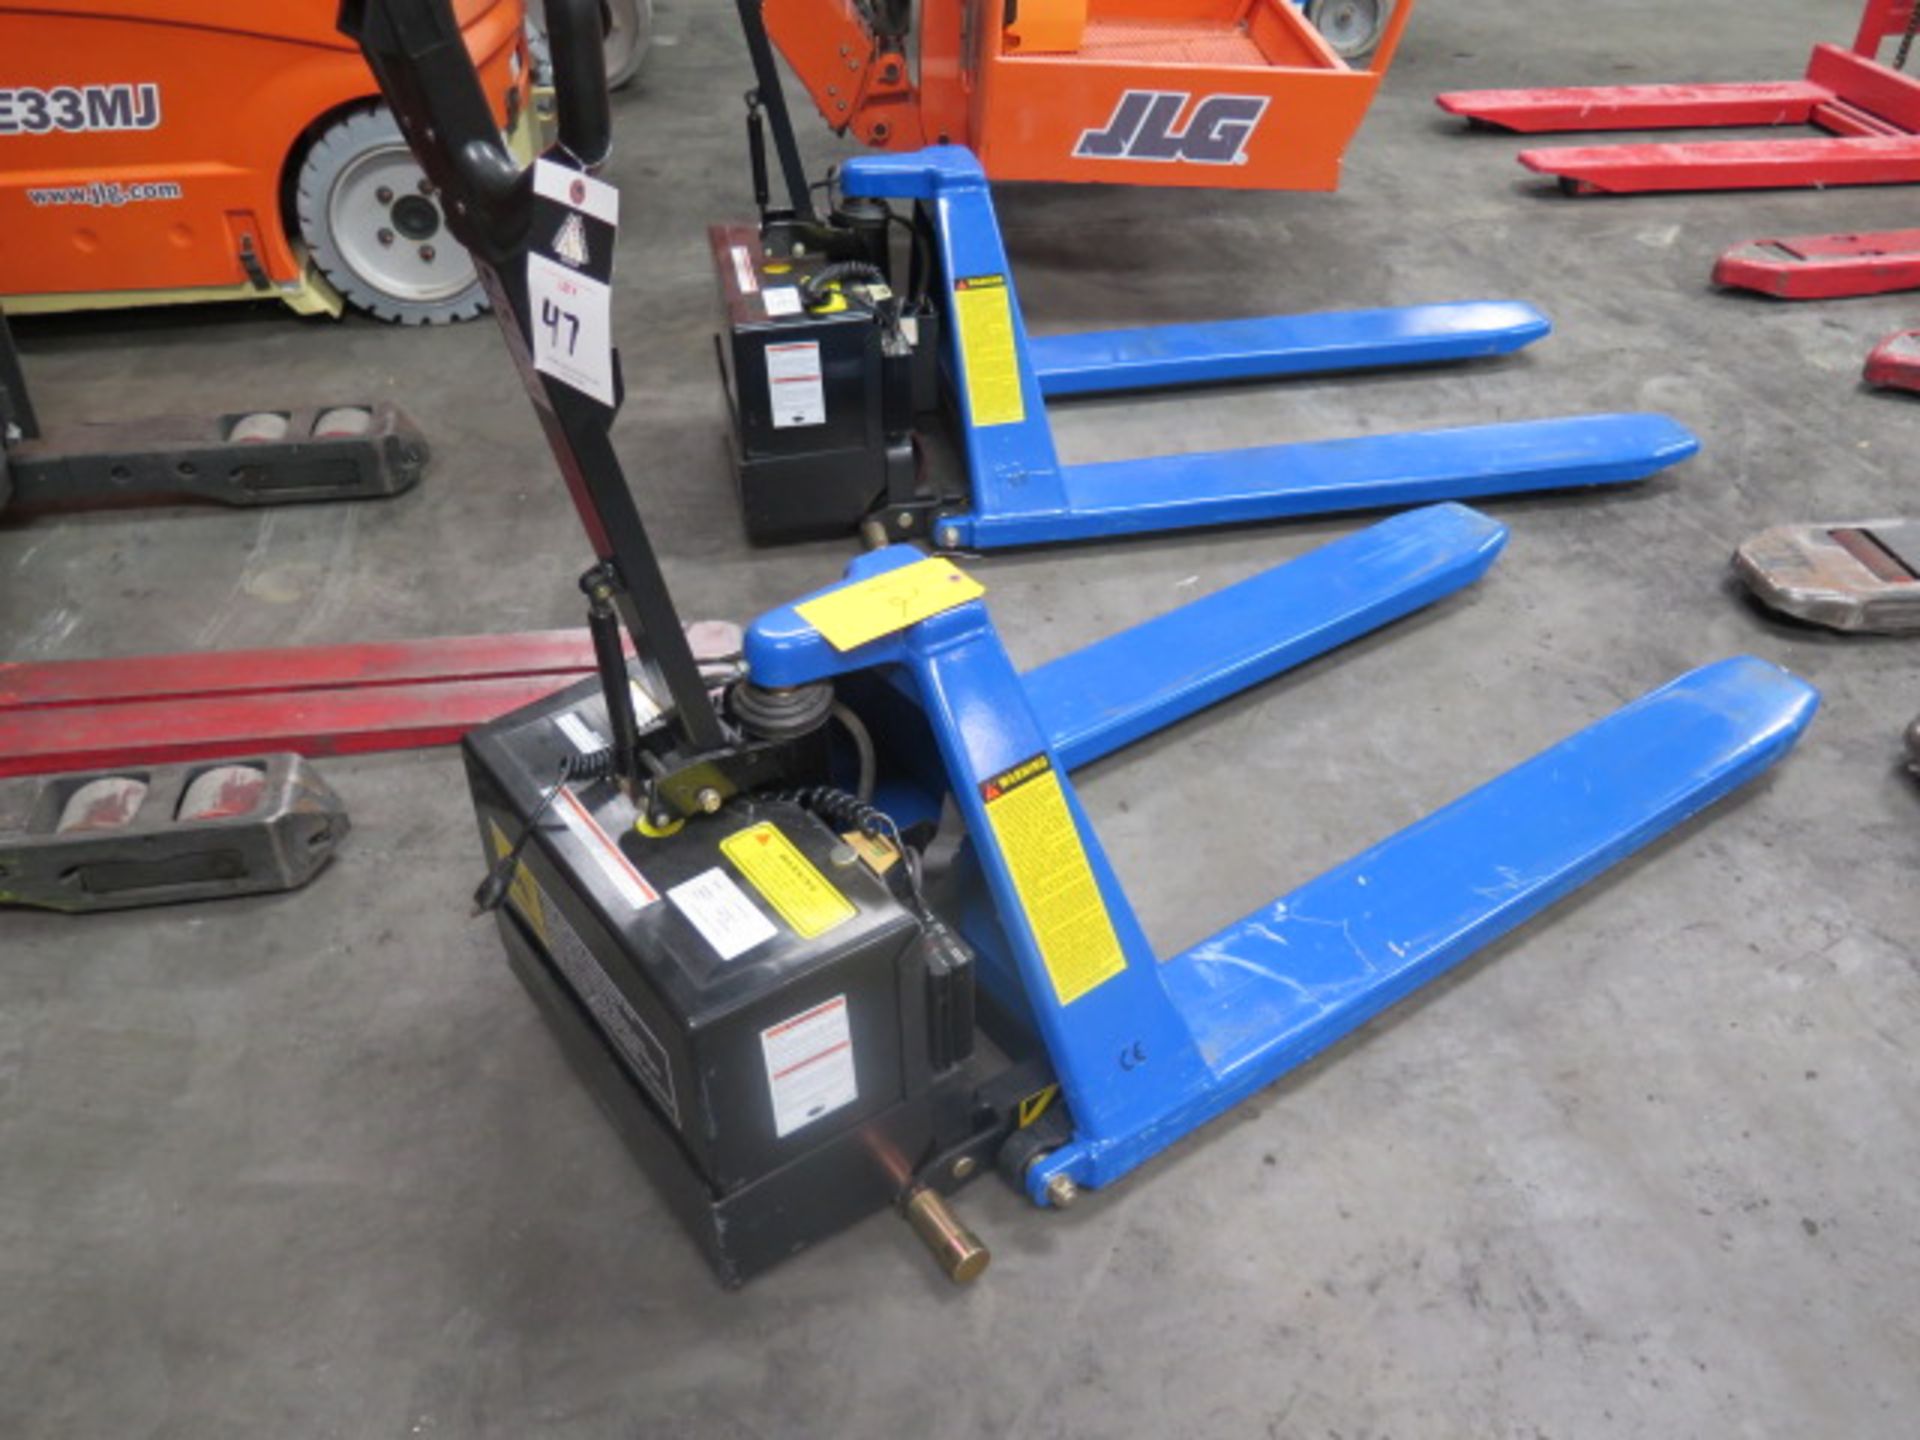 2015 Import mdl L-270-DC-HD 3000 Lb Cap Electric Pallet Jack w/ Built-In Charger, SOLD AS IS - Image 2 of 8